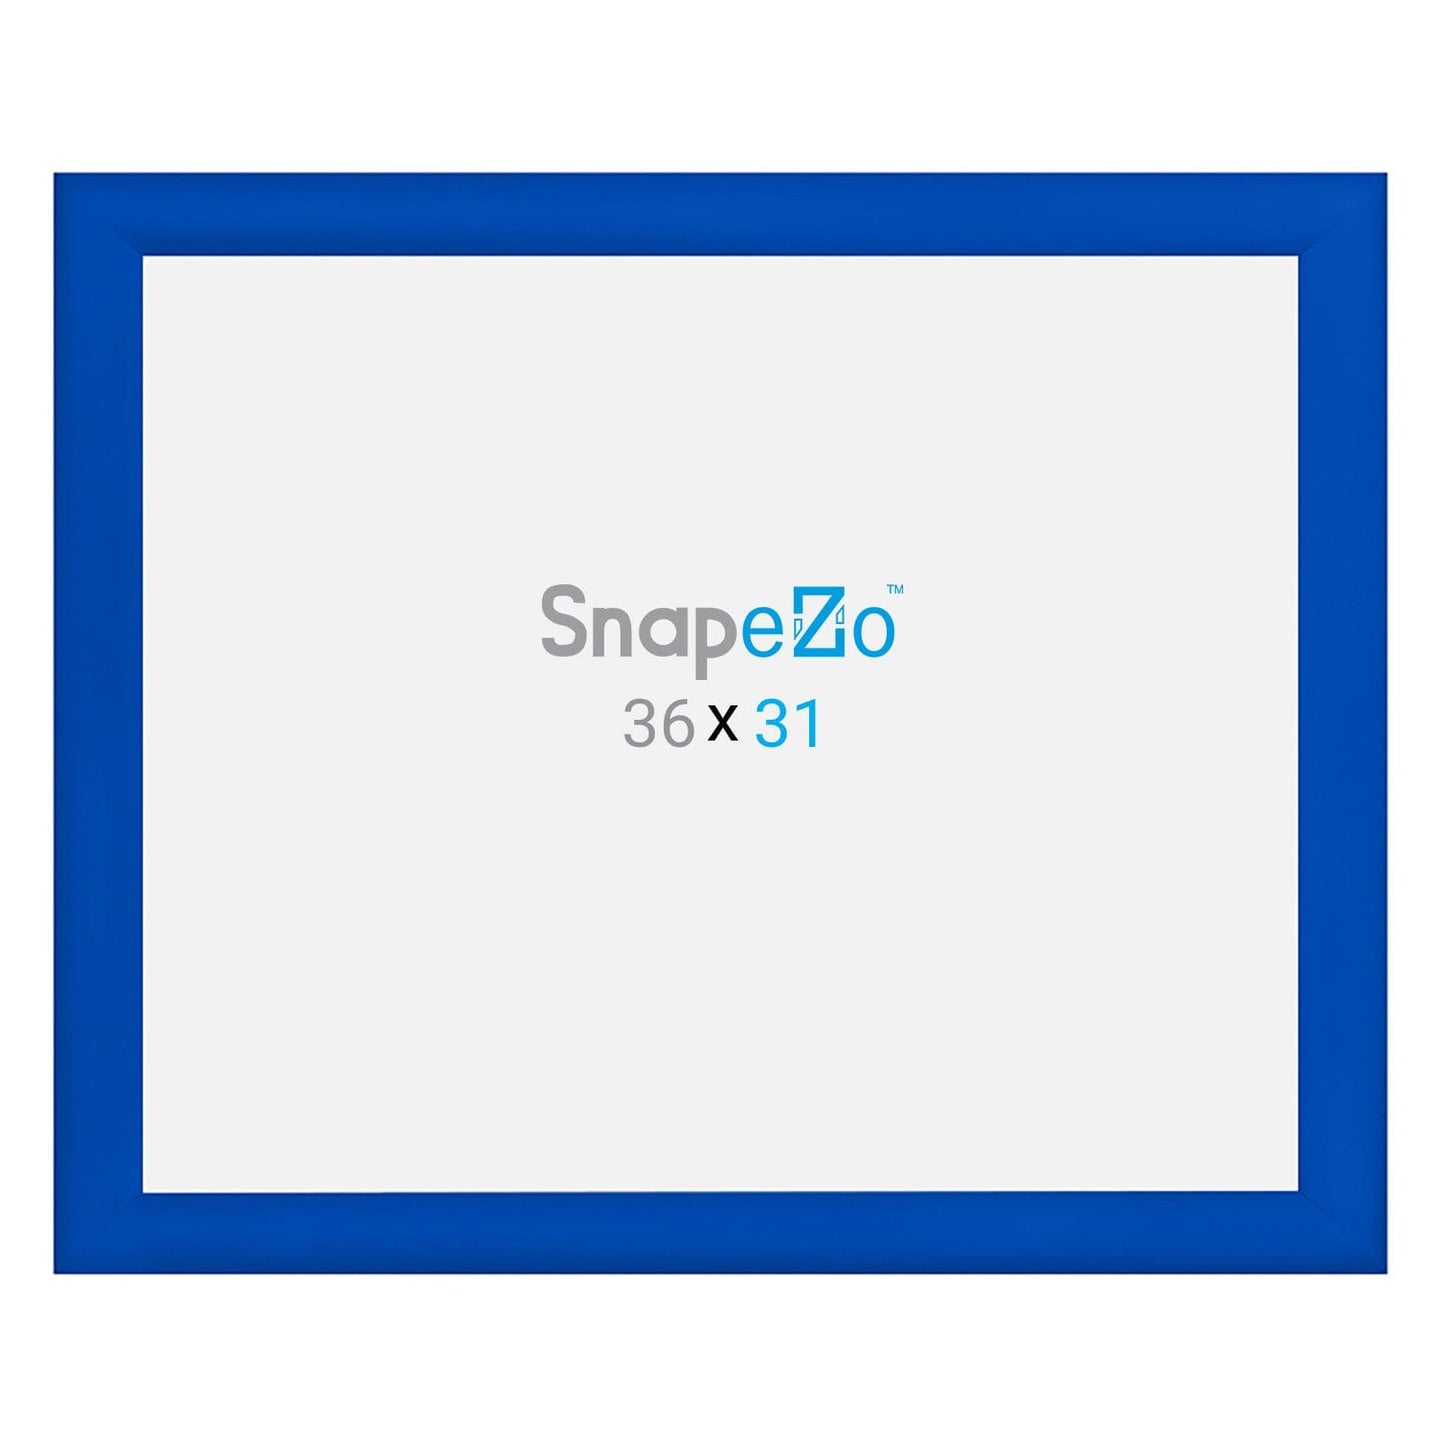 31x36 Blue SnapeZo® Snap Frame - 1.2" Profile - Snap Frames Direct